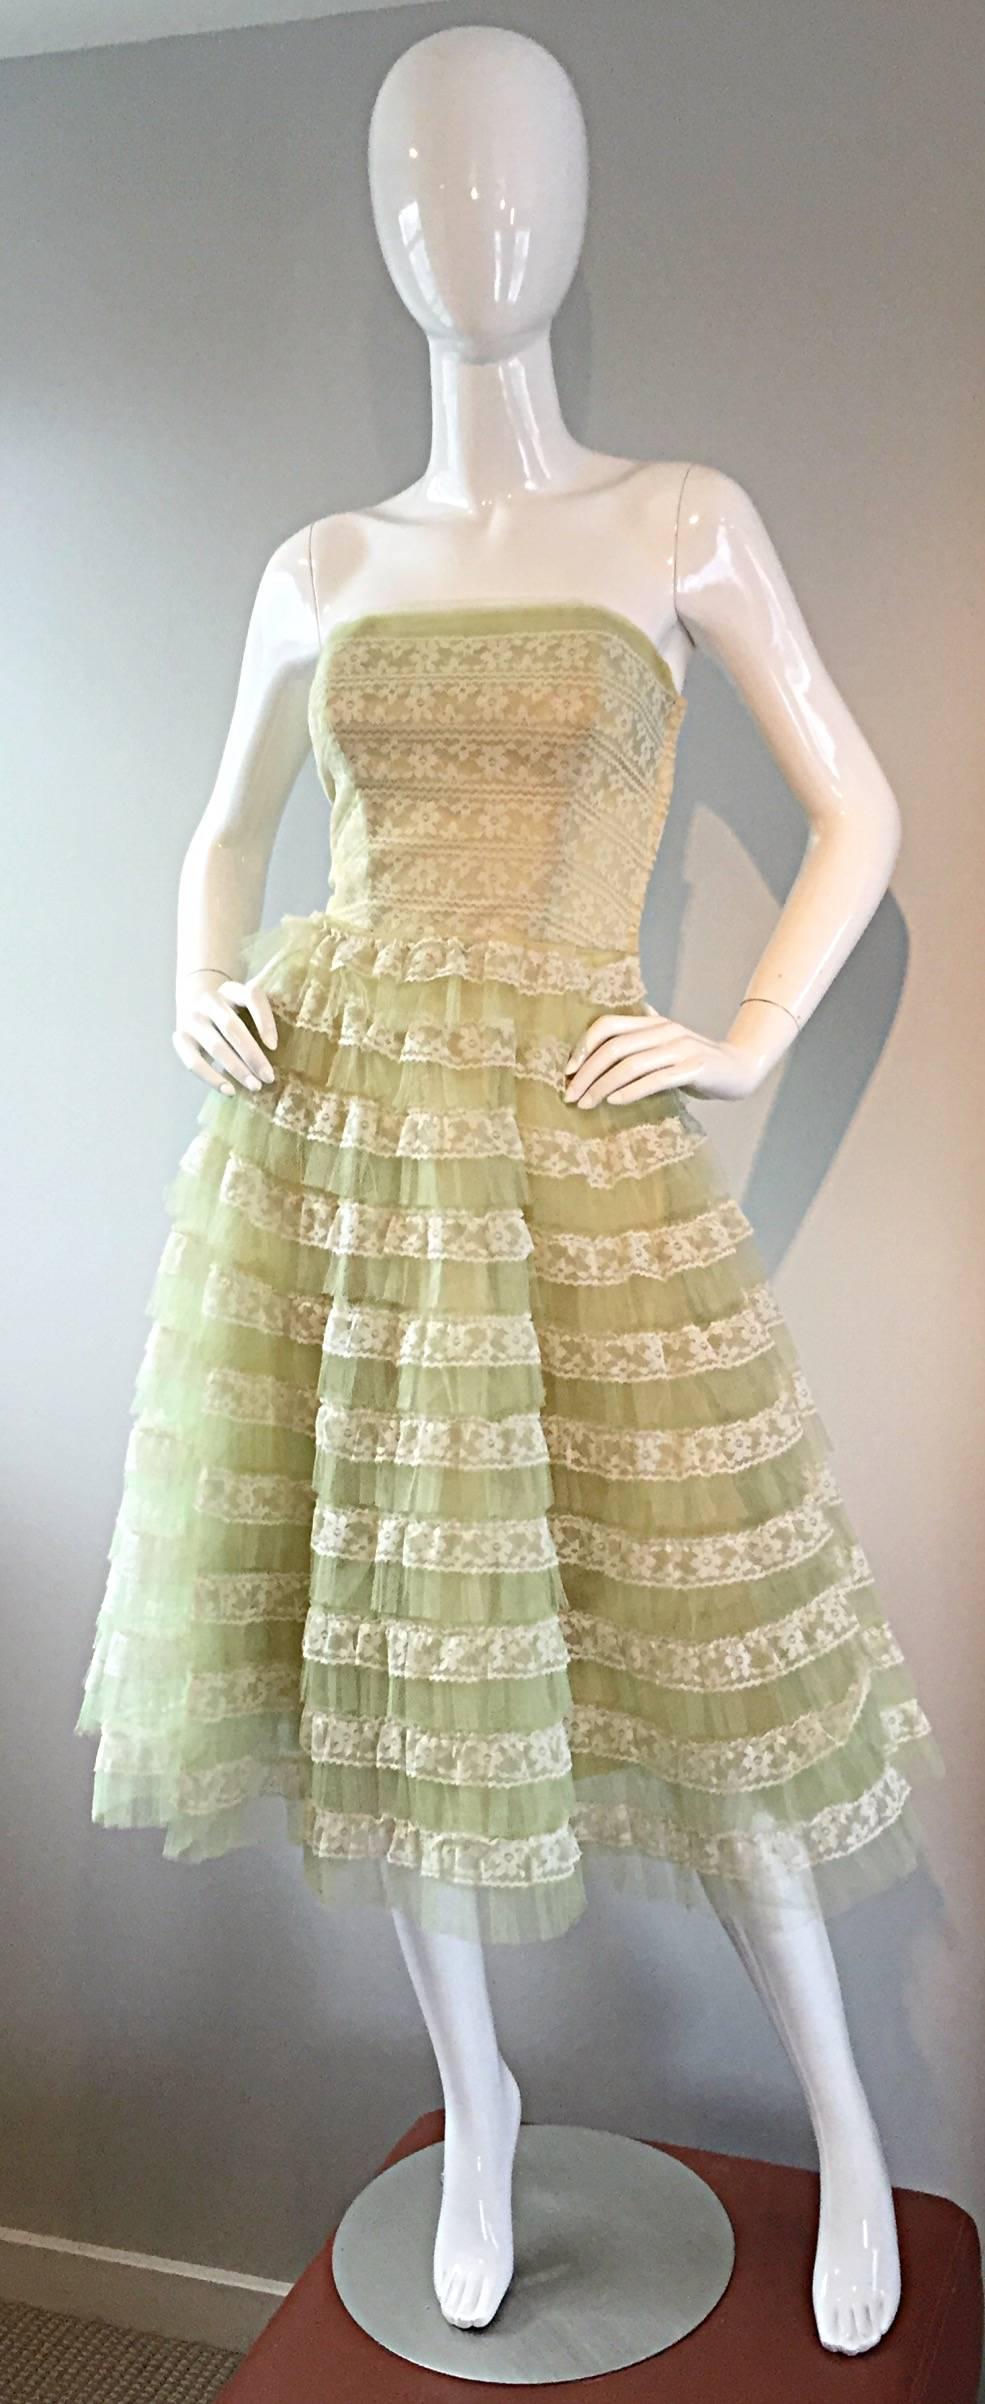 Prettiest 1950s strapless light green dress! Layers and layers of floral lace, with a full skirt (built in crinoline under skirt). Wonderful construction, with a full metal zipper up the side bodice, with hook-and-eye closure. Such a beautiful mid